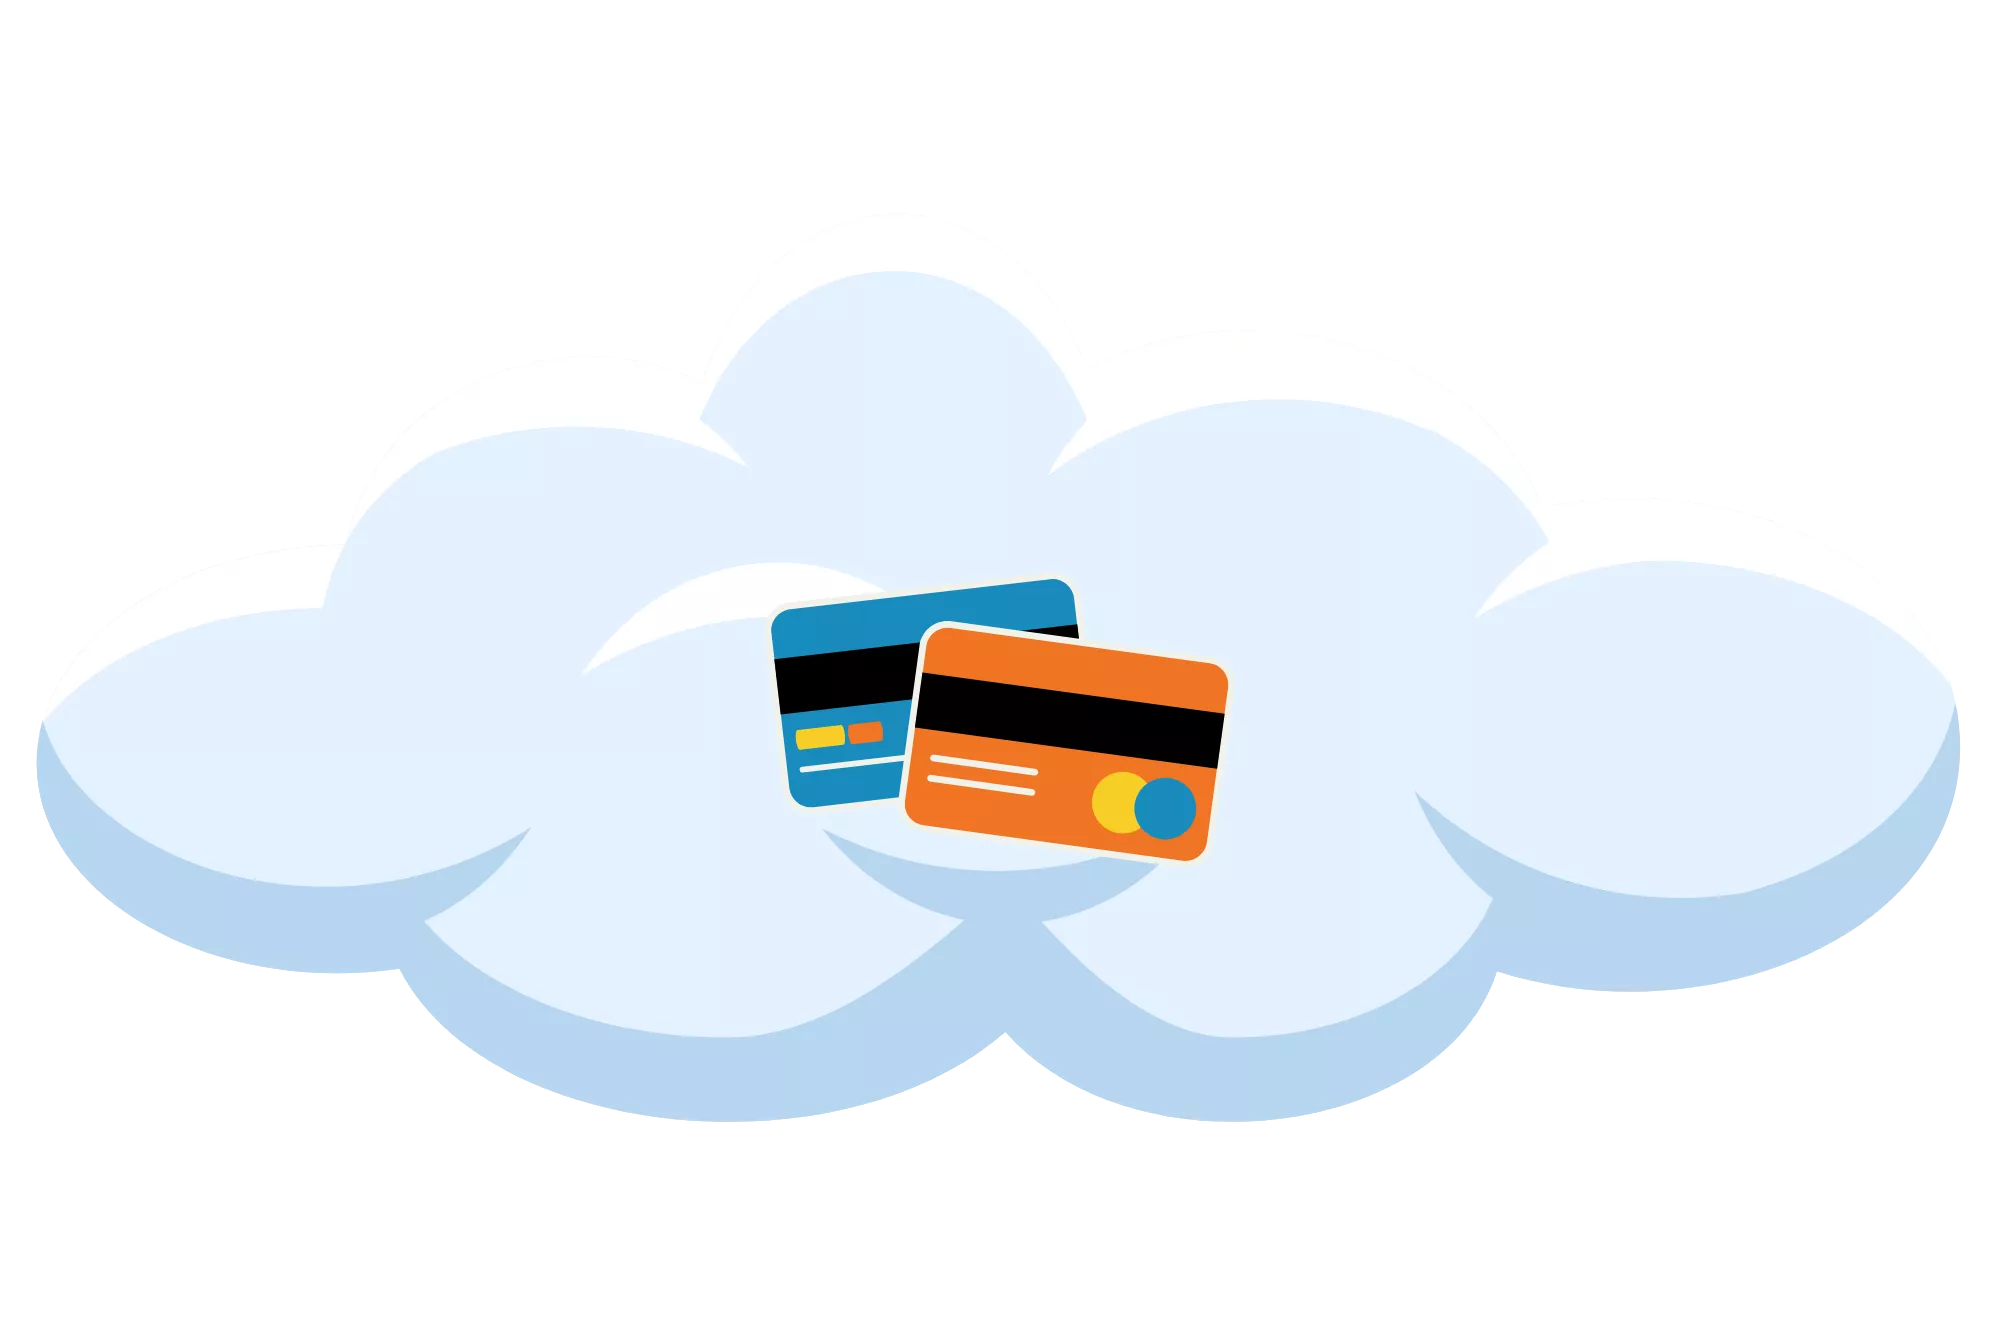 Credit cards on a cloud ready to be processed via a cloud-based payment gateway API.